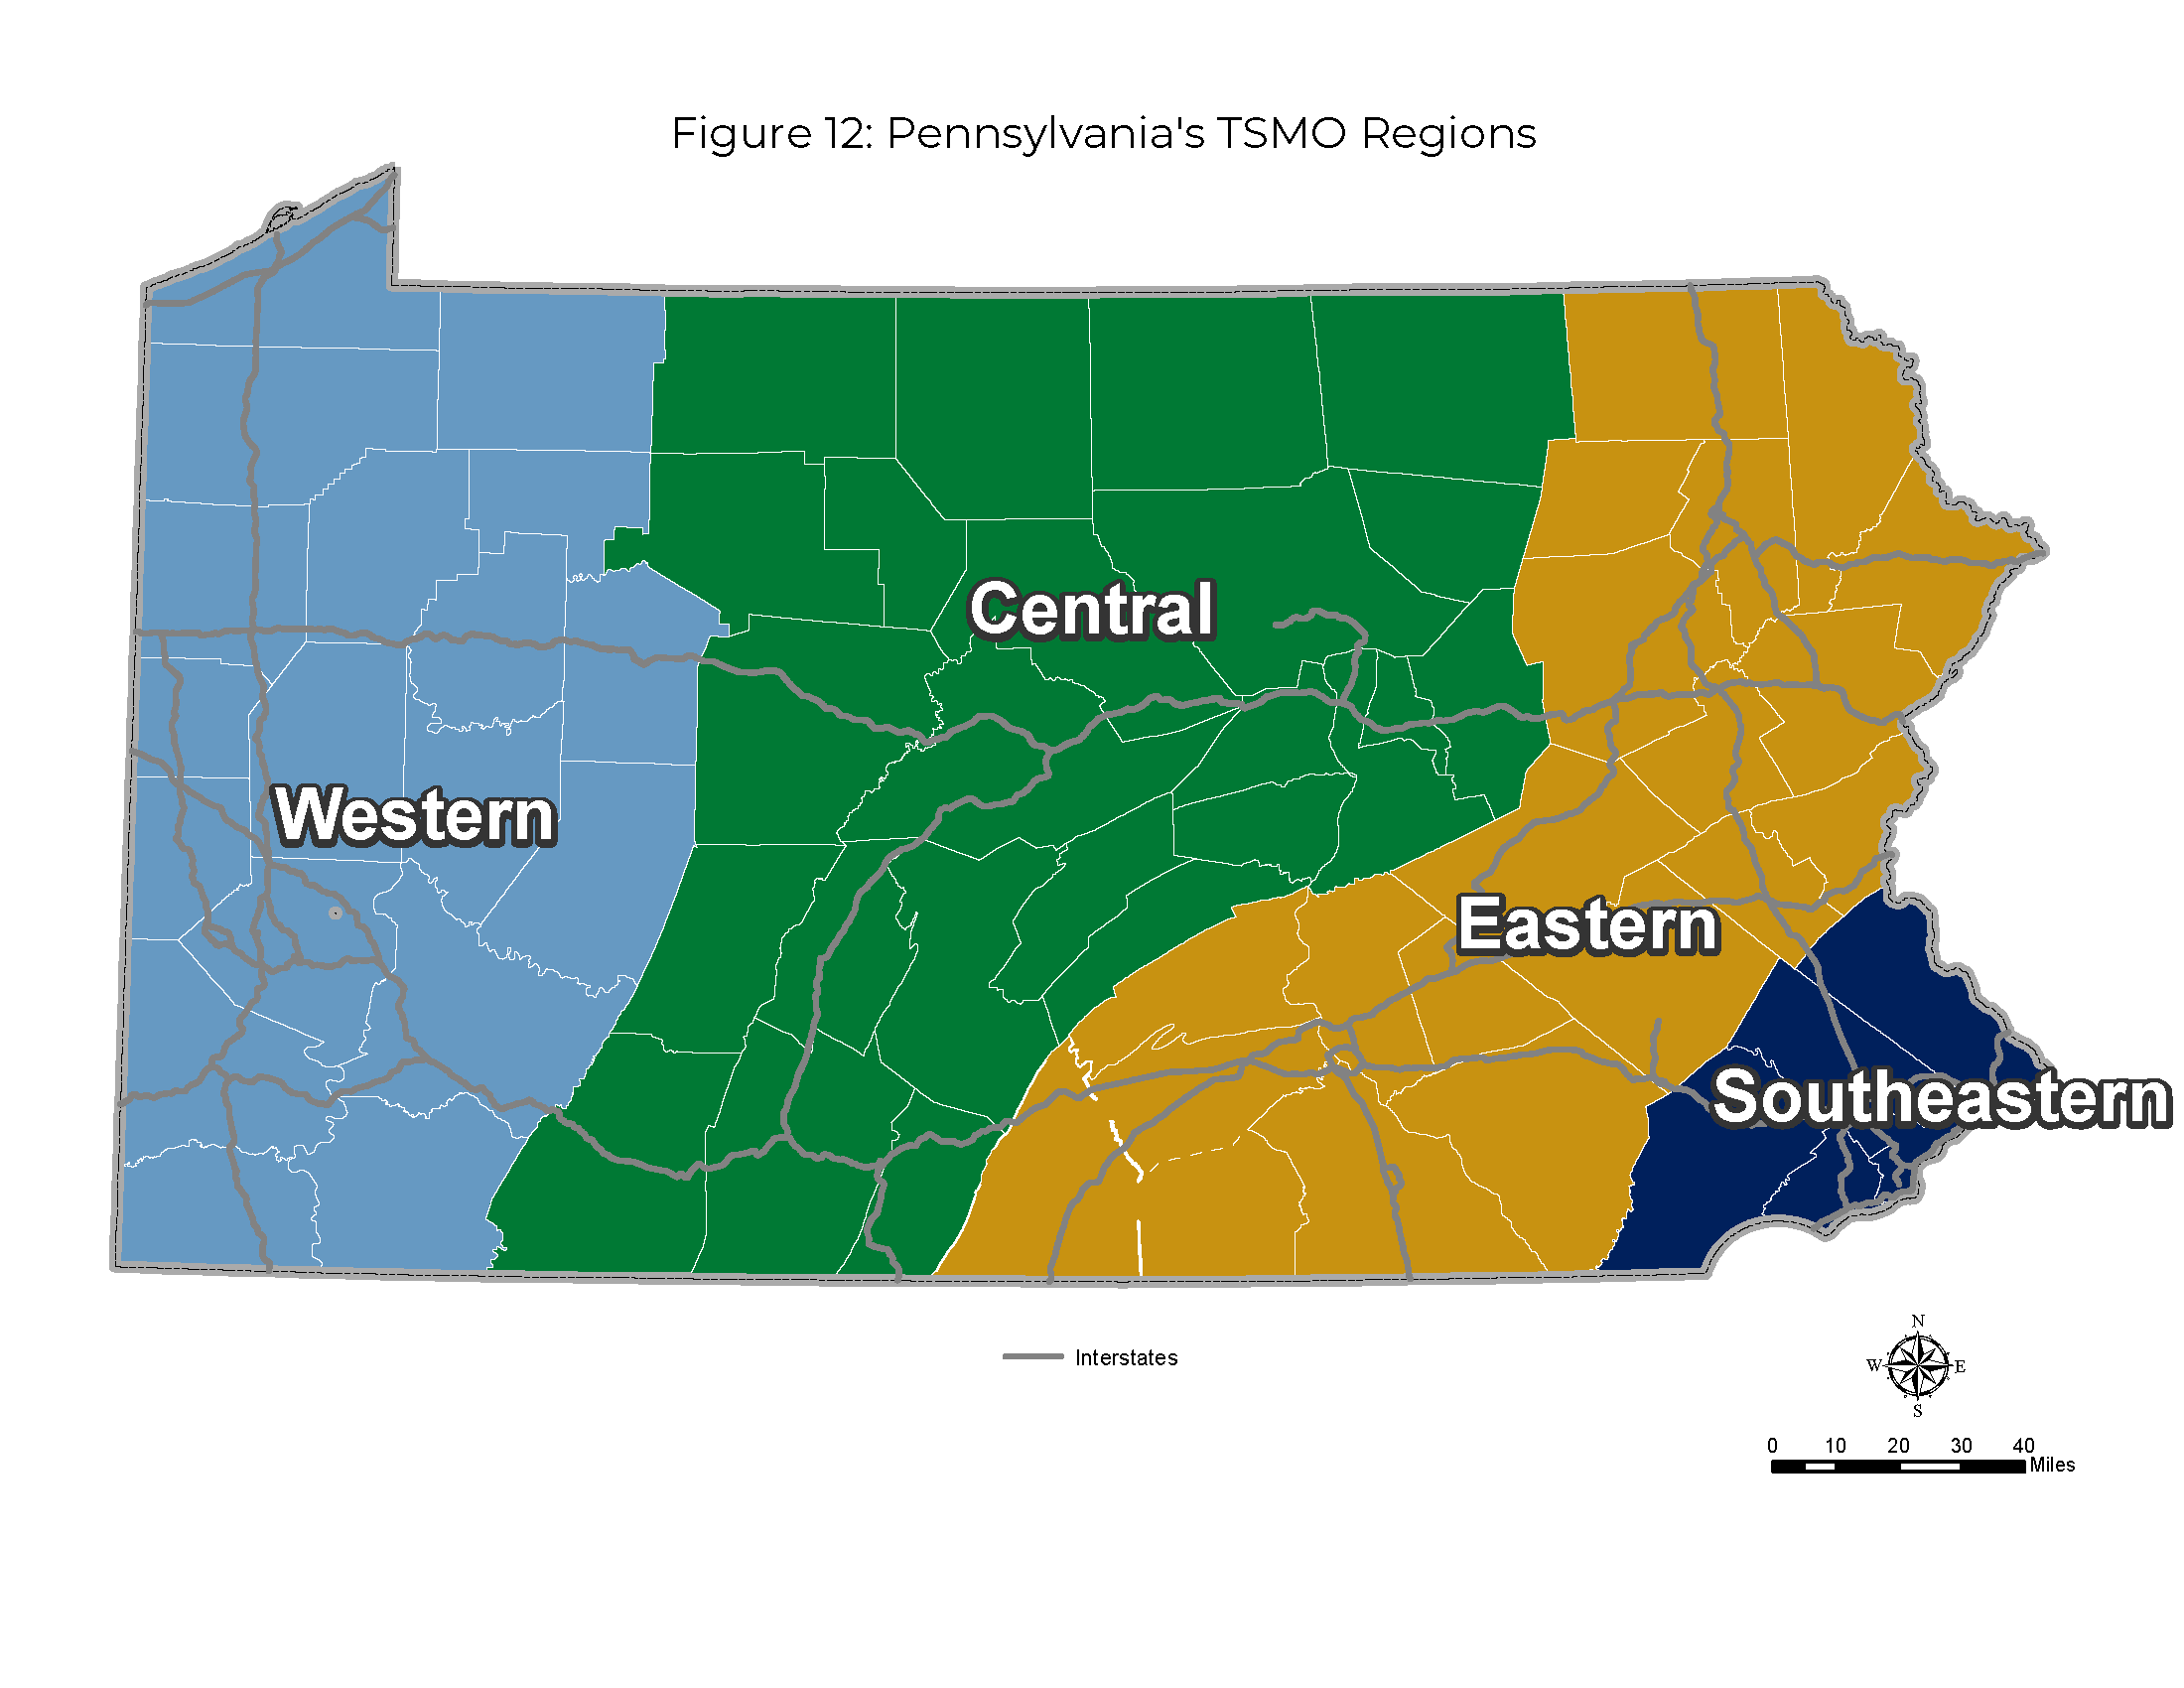 Figure 12 is PennDOT's state map of Pennsylvania illustrating the four Transportation Systems Management and Operation regions of Western, Central, Eastern, and Southeastern.